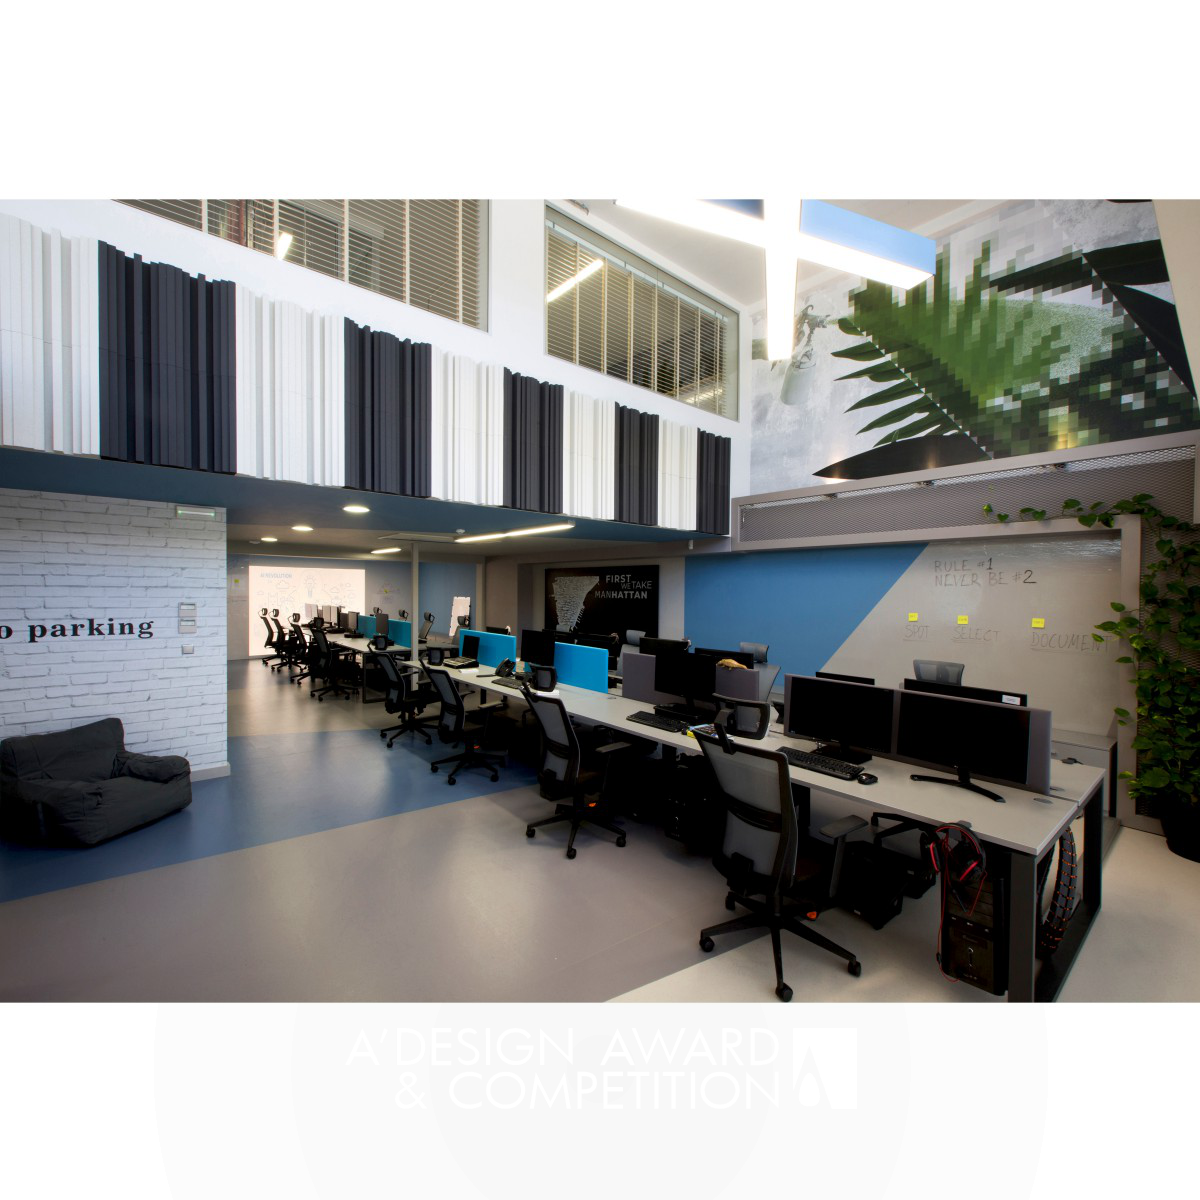 Xplain Headquarters: Shaping the Future of Corporate Workspaces